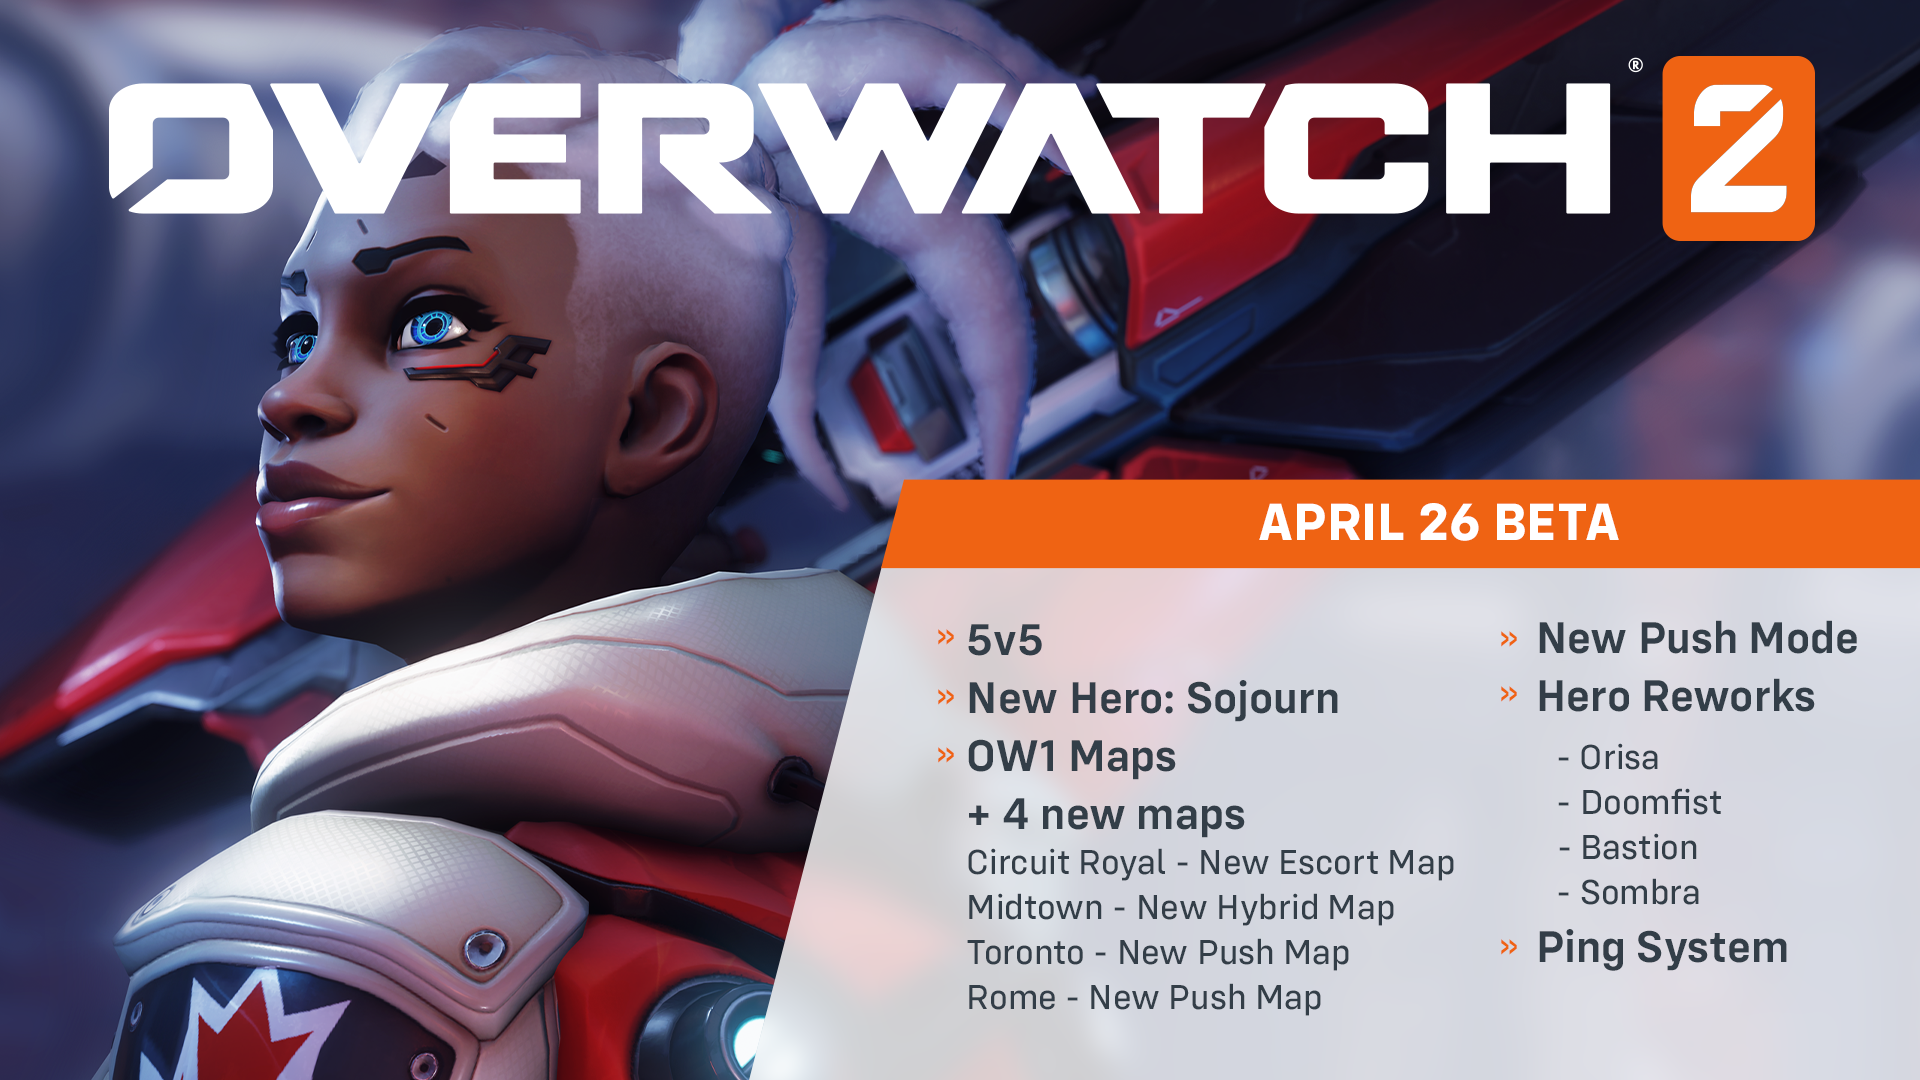 Overwatch 2 PVP Beta coming late April. The Beta will include 5v5, a new game mode, hero, ping system as well as new maps and hero reworks.